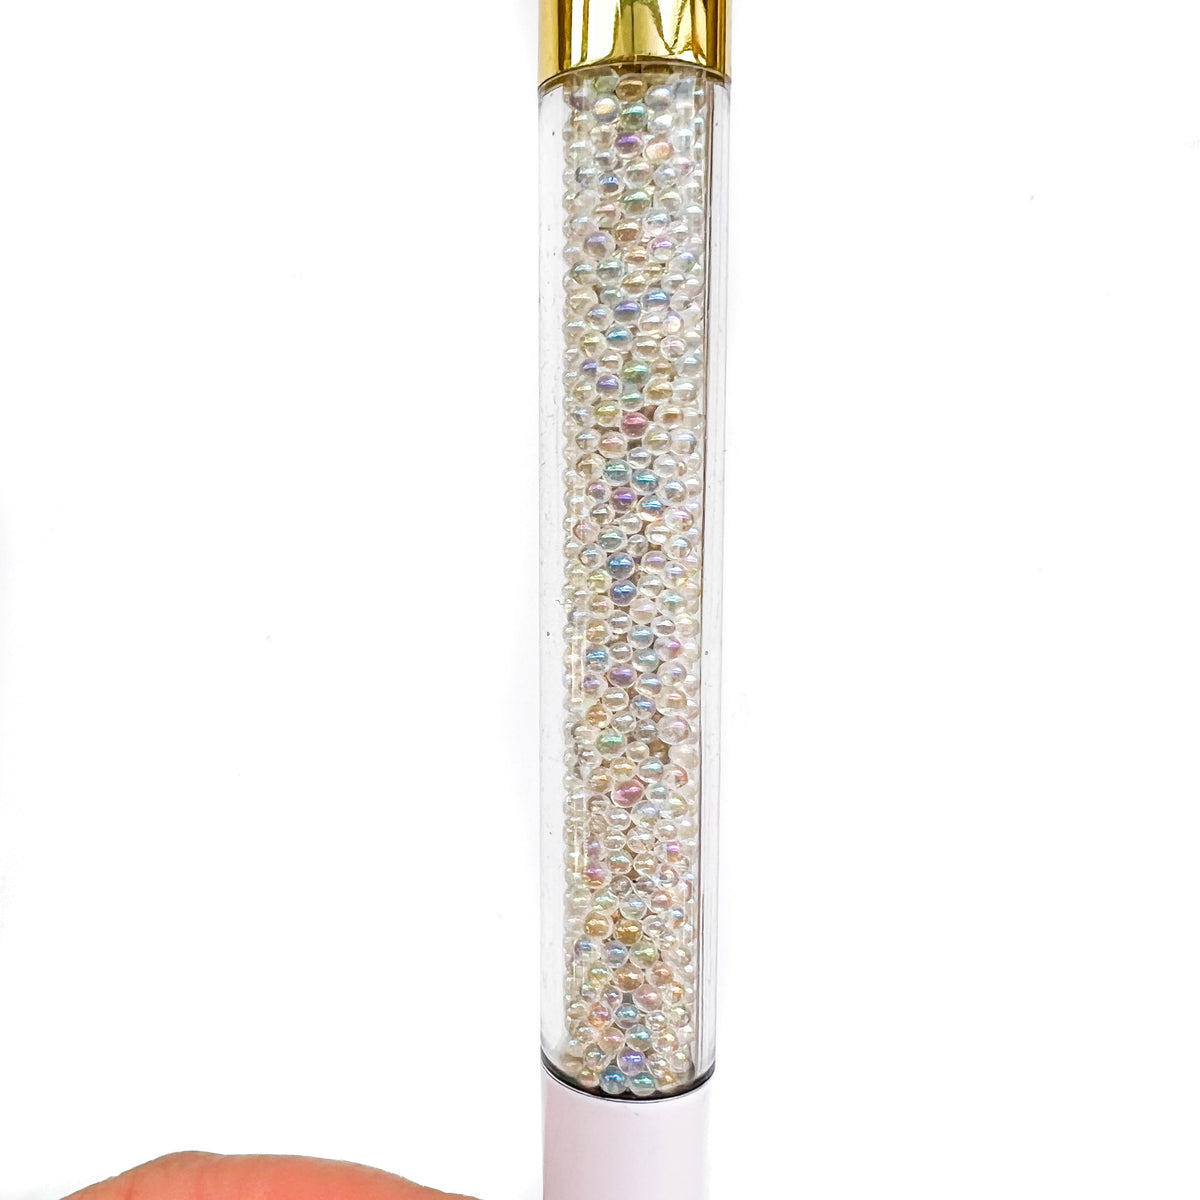 Pearls and Lace Imperfect Crystal VBPen | limited kit pen